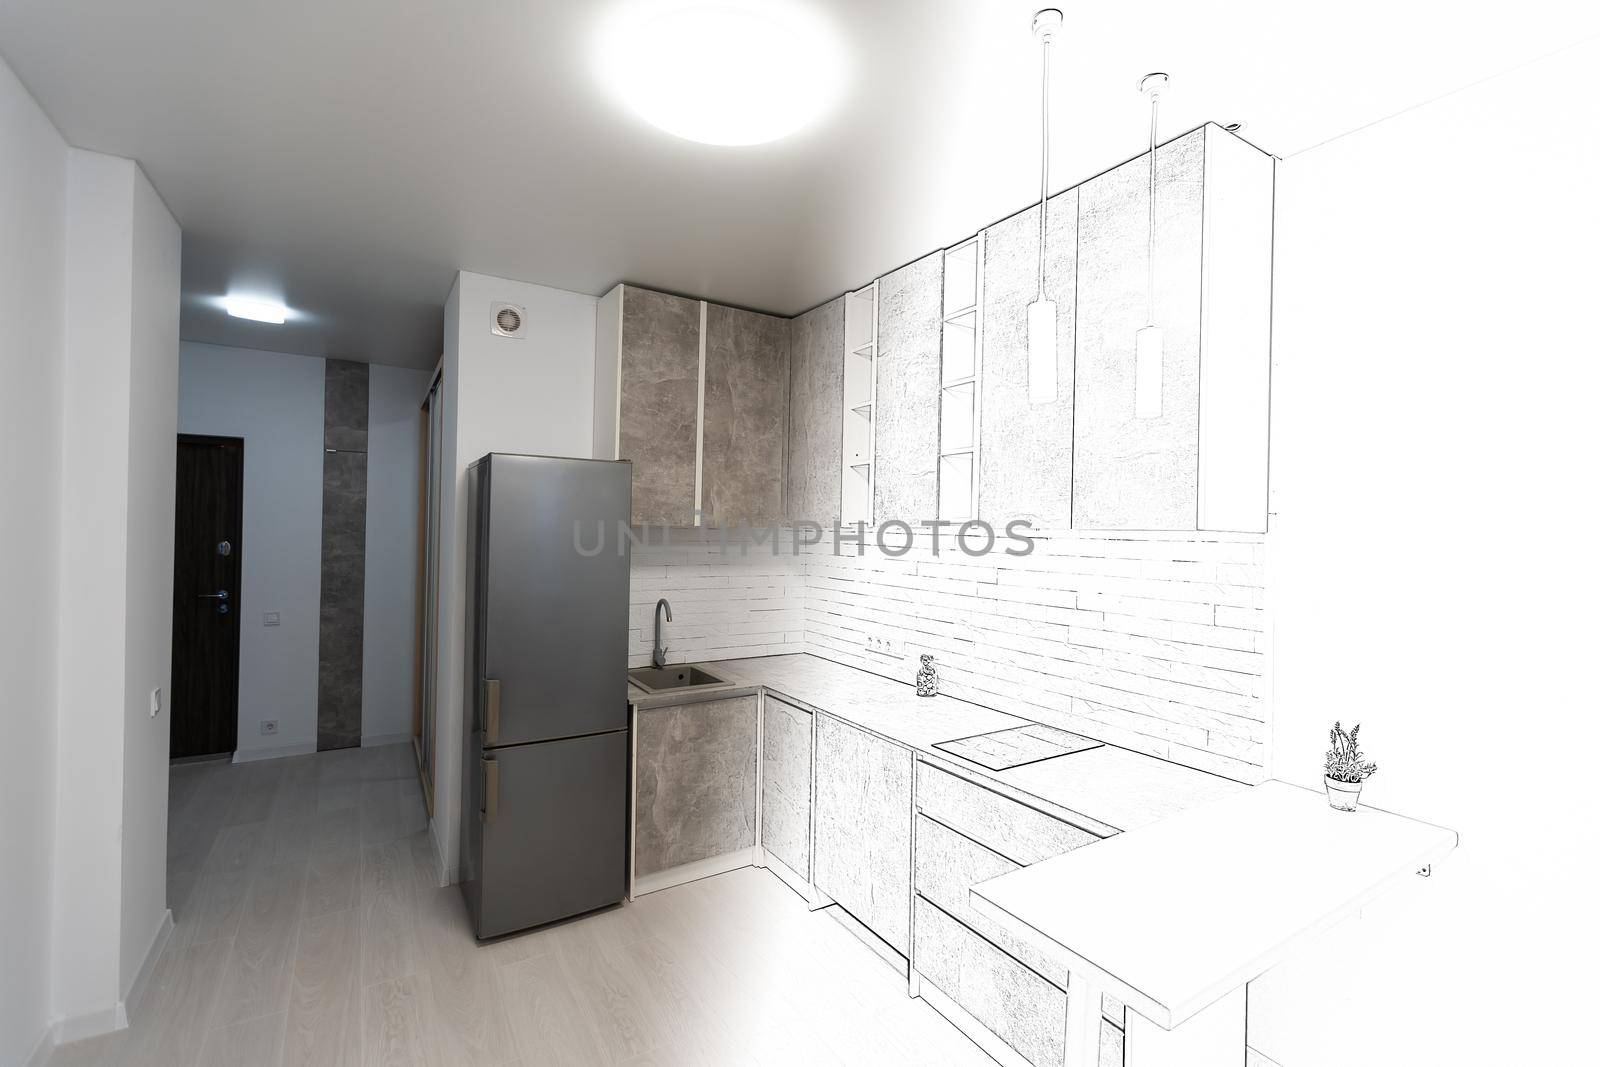 plan illustration and room berfore renovation concept drawing by Andelov13